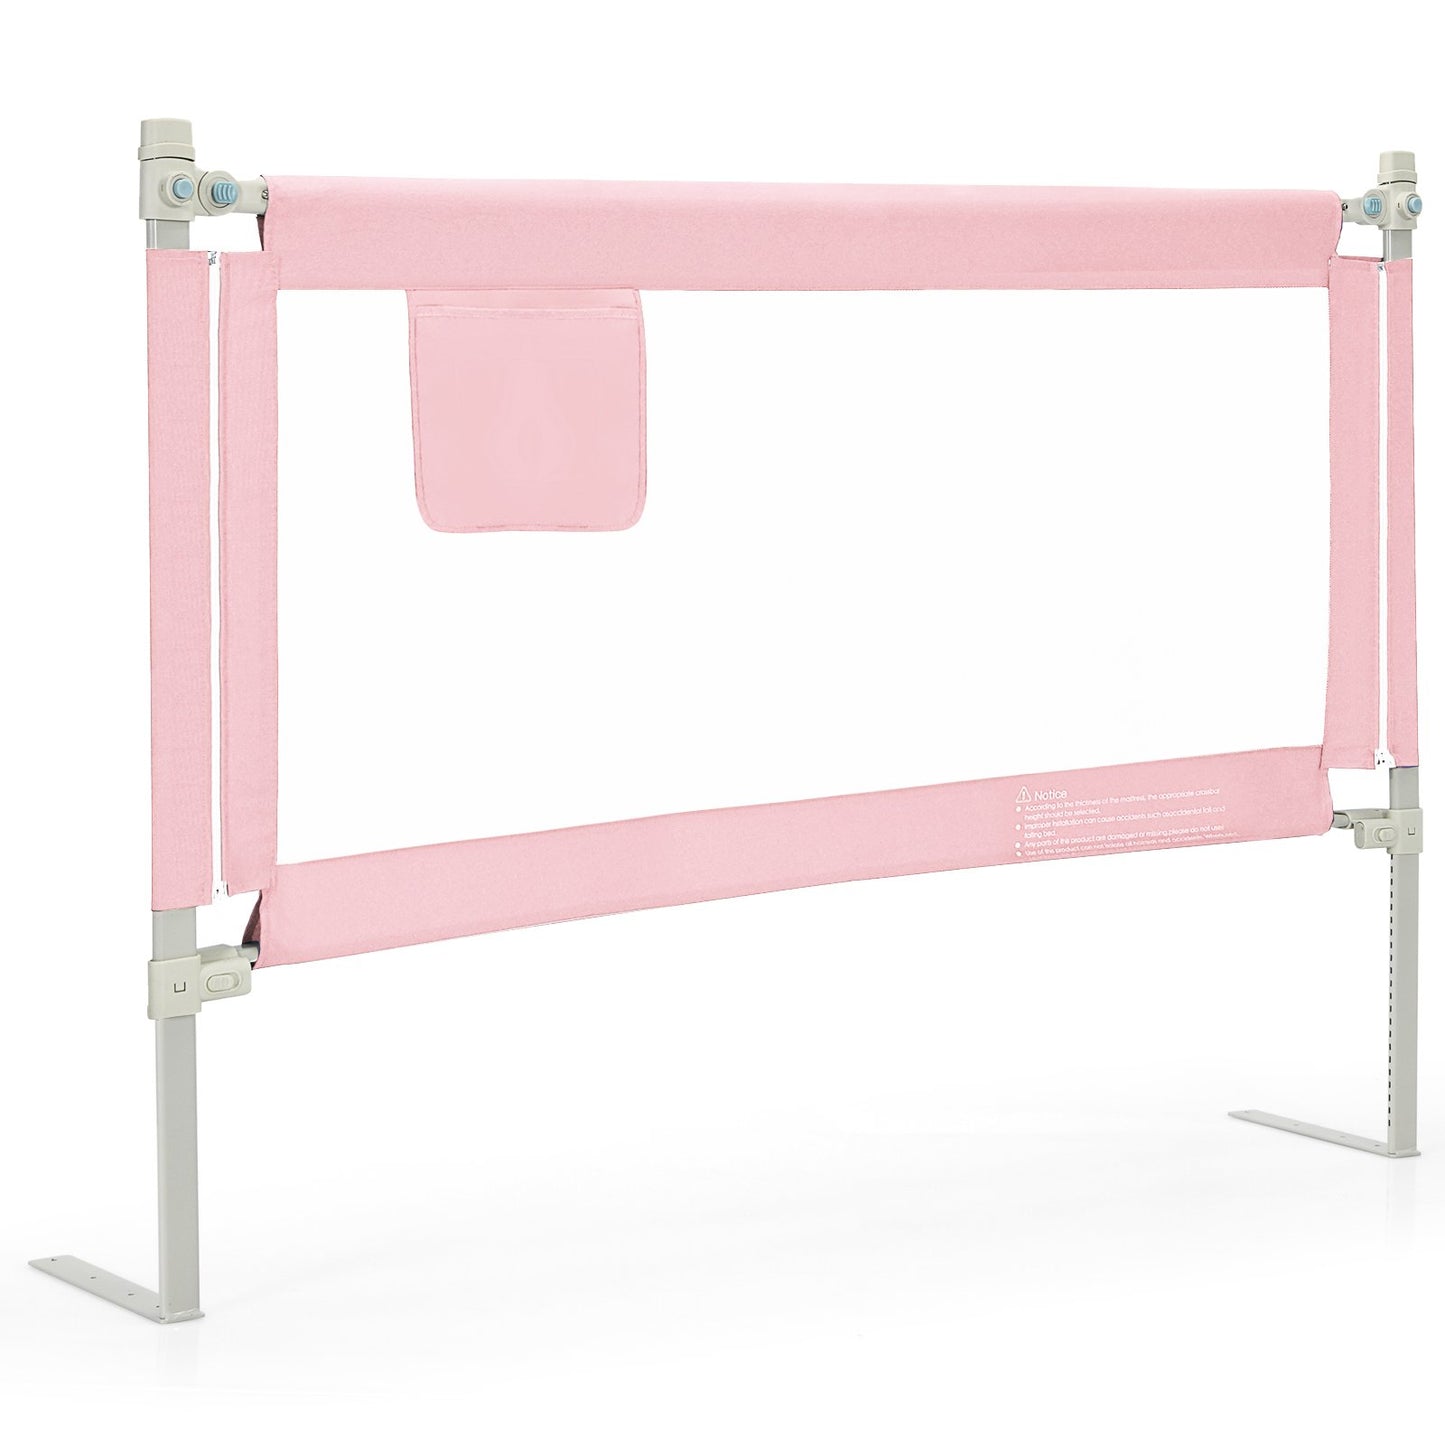 57 Inch Toddlers Vertical Lifting Baby Bed Rail Guard with Lock, Pink